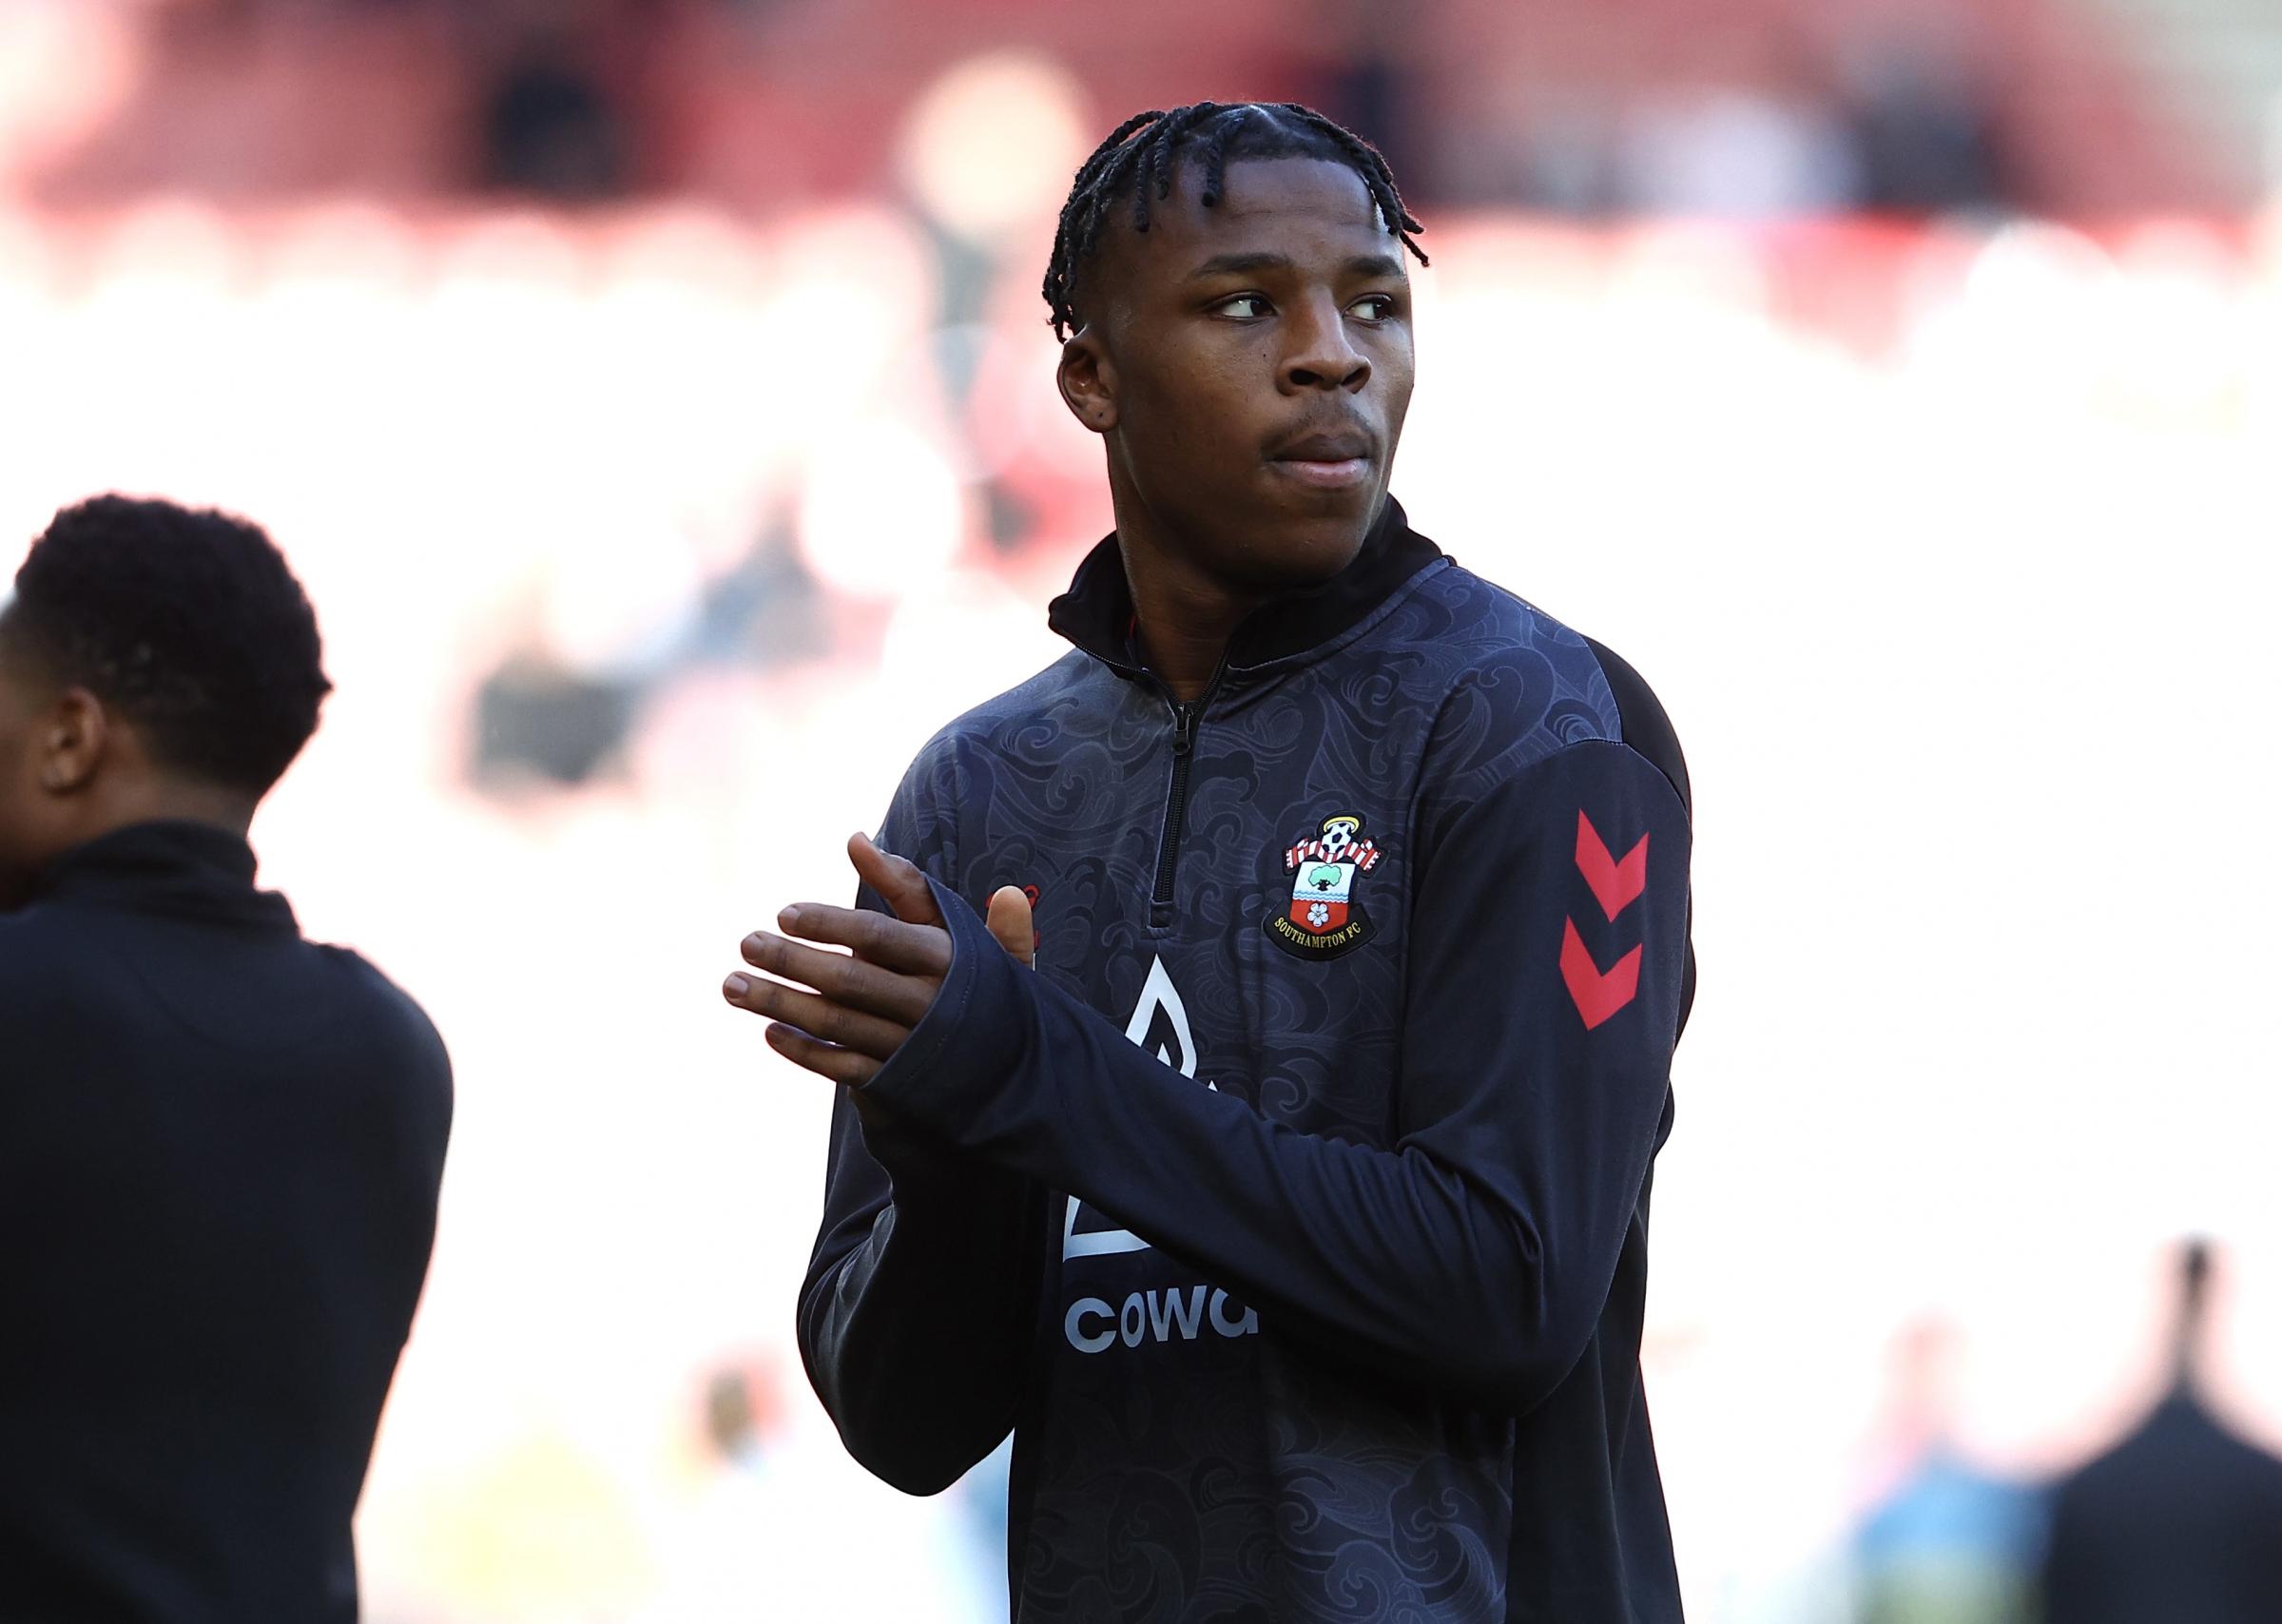 Southampton defender issues message to fans after season-ending injury